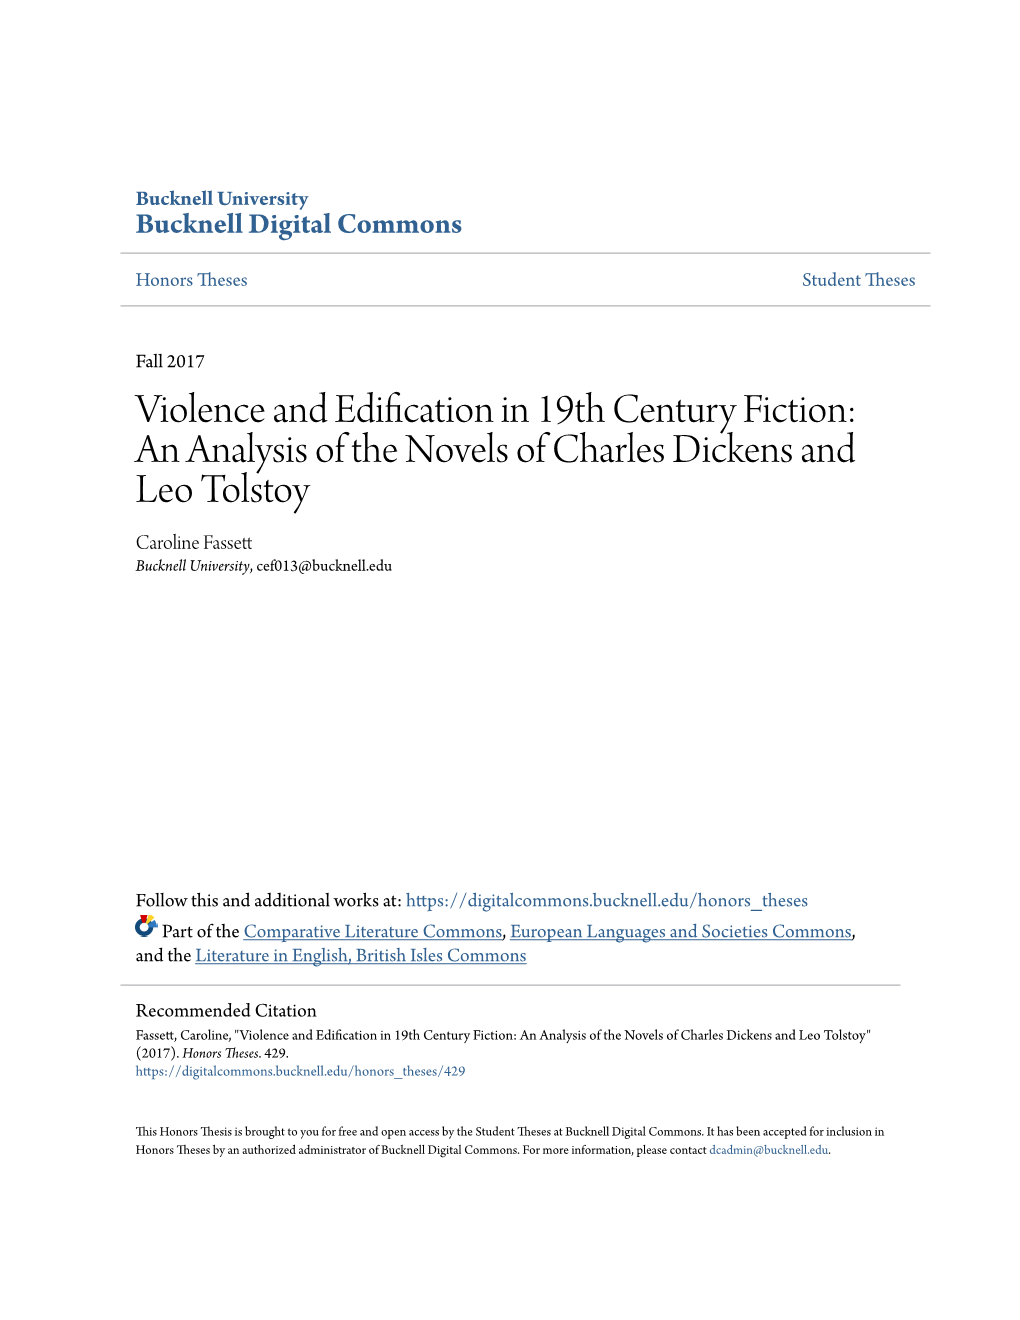 Violence and Edification in 19Th Century Fiction: an Analysis of the Novels of Charles Dickens and Leo Tolstoy